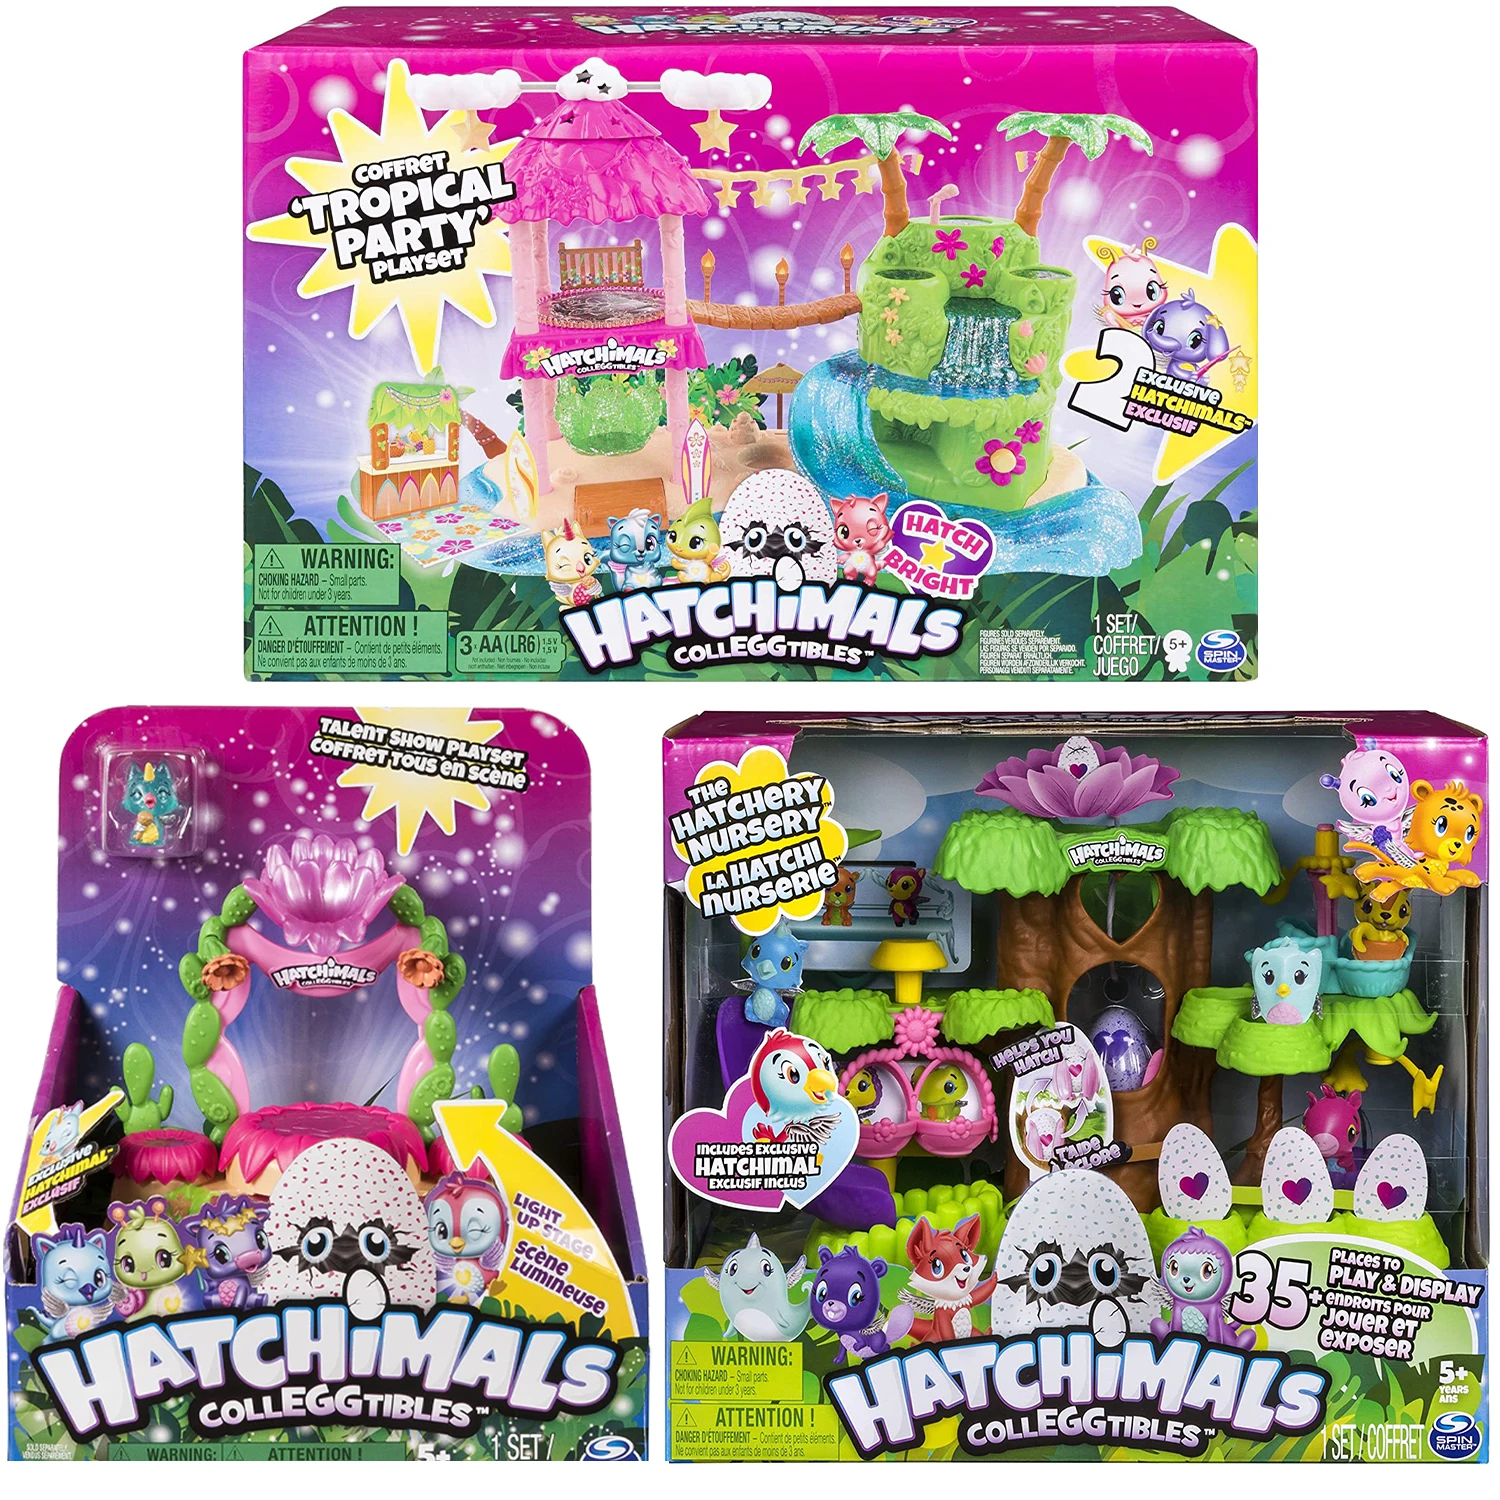 Hatchimals CollEGGtibles Hatchery Pet Nursery Playset Tropical Party Playset Girl Toy Set Collectible Surprise Gift Game House